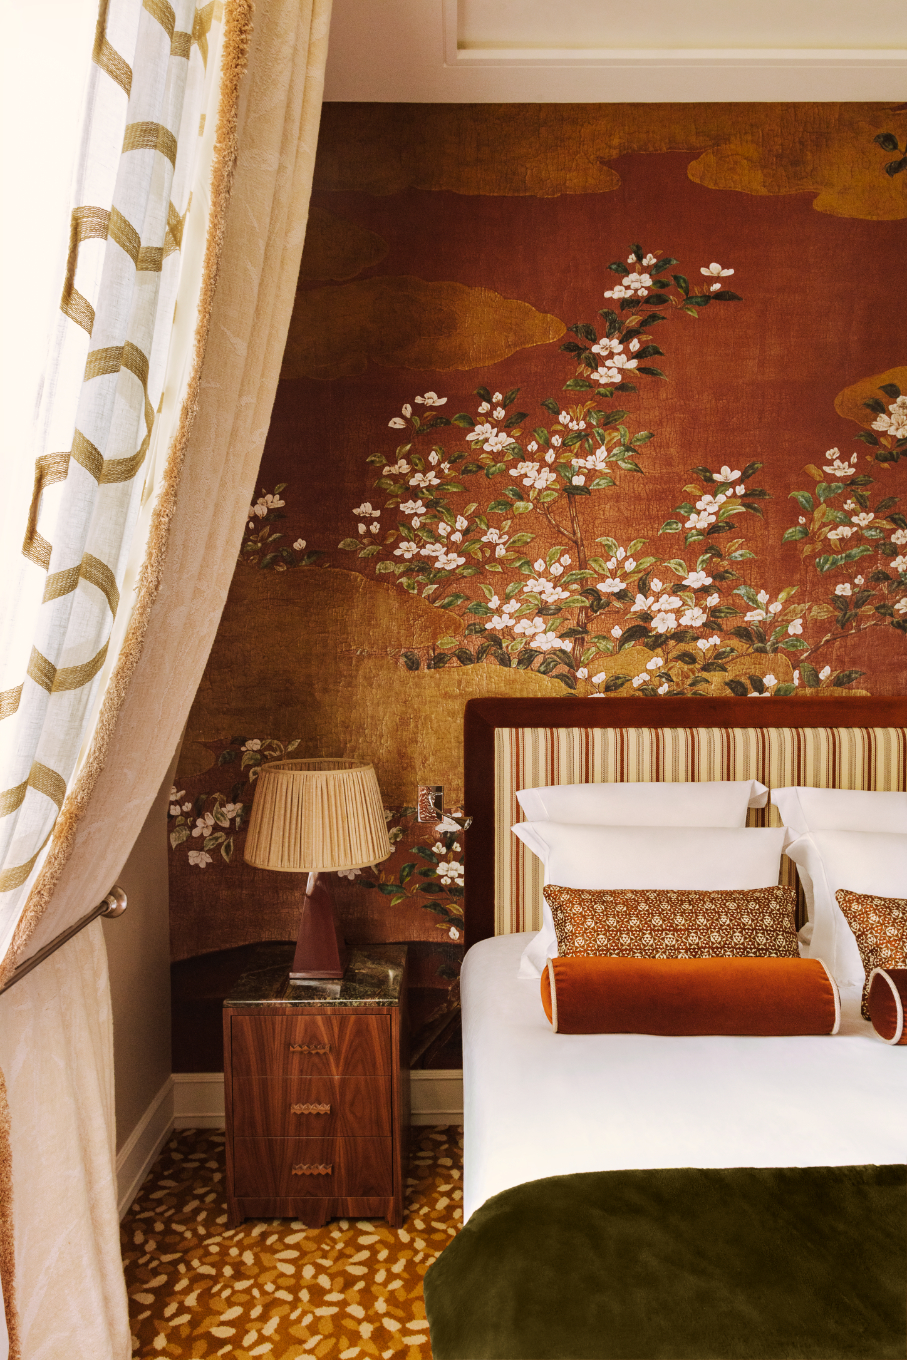 A cinnamon colored room at Saint James Paris with maximalist interiors, Asian-inspired chinoiserie wallpaper, striped headboards, raffia lampshades, velvet pillows and thick beige curtains